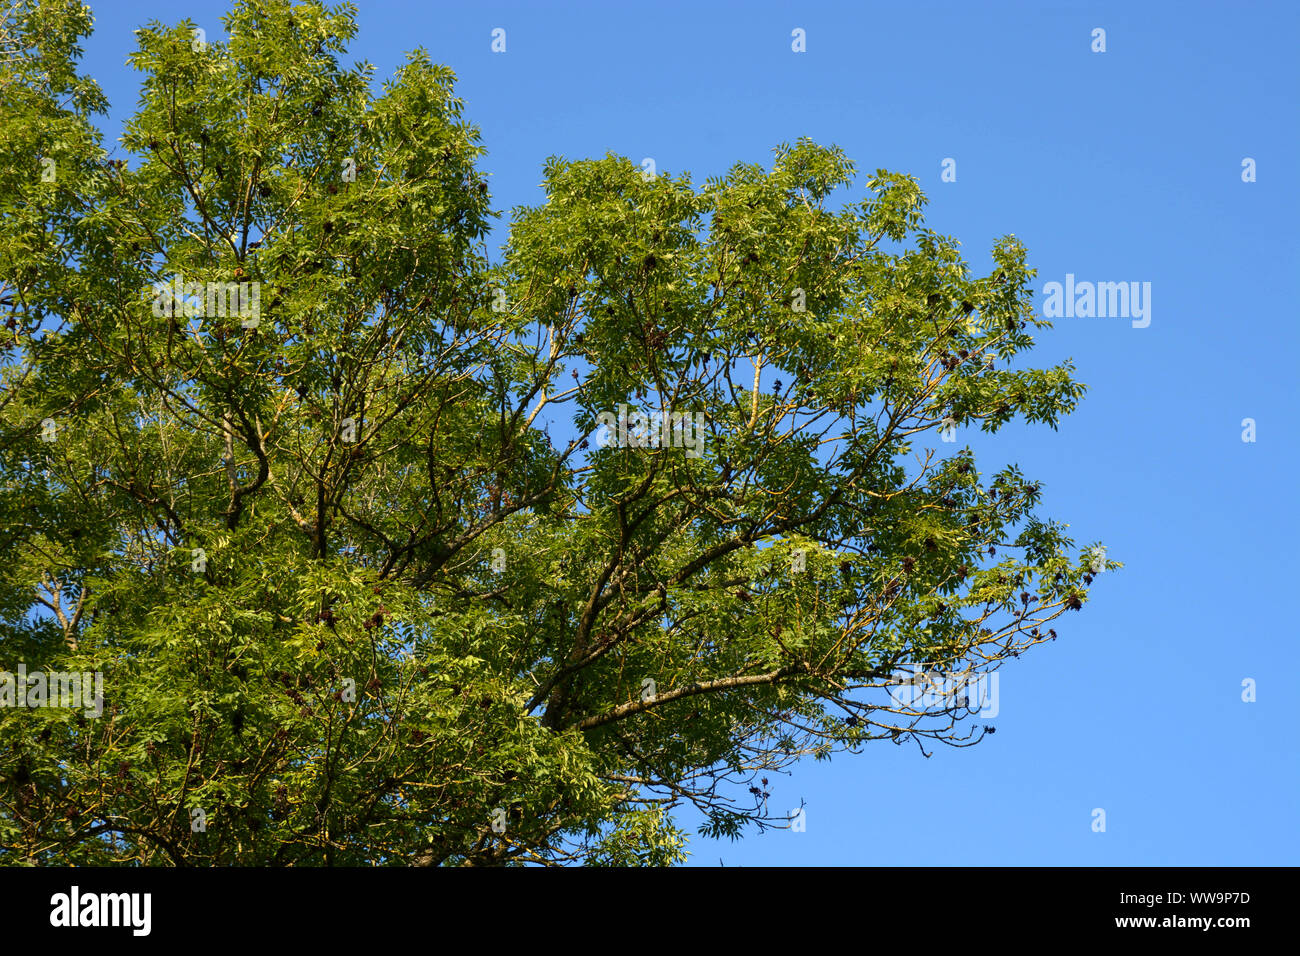 big Ash Tree or fraxinus excelsior in front of blue clear sky, common ash tree with fruits Stock Photo